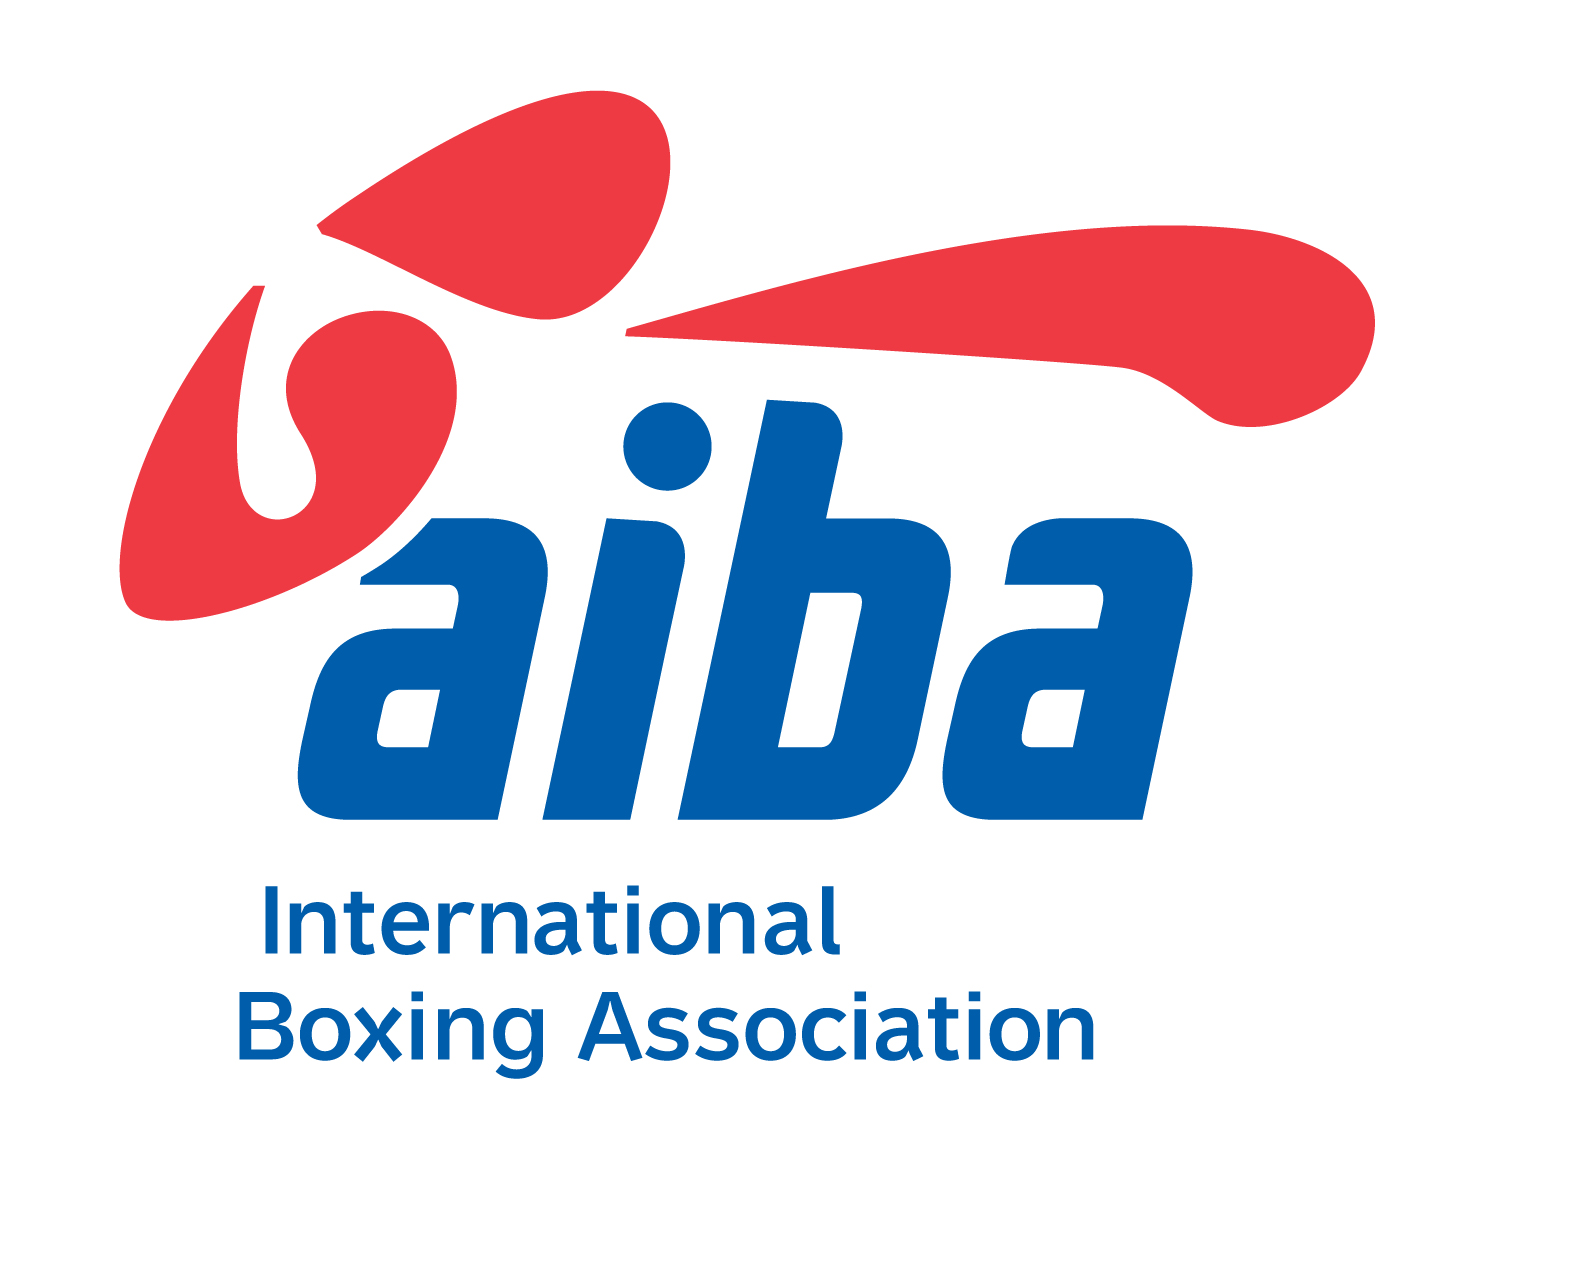 Historic moment for AIBA, as women boxers take stage in 2015 Pacific Games for the first time